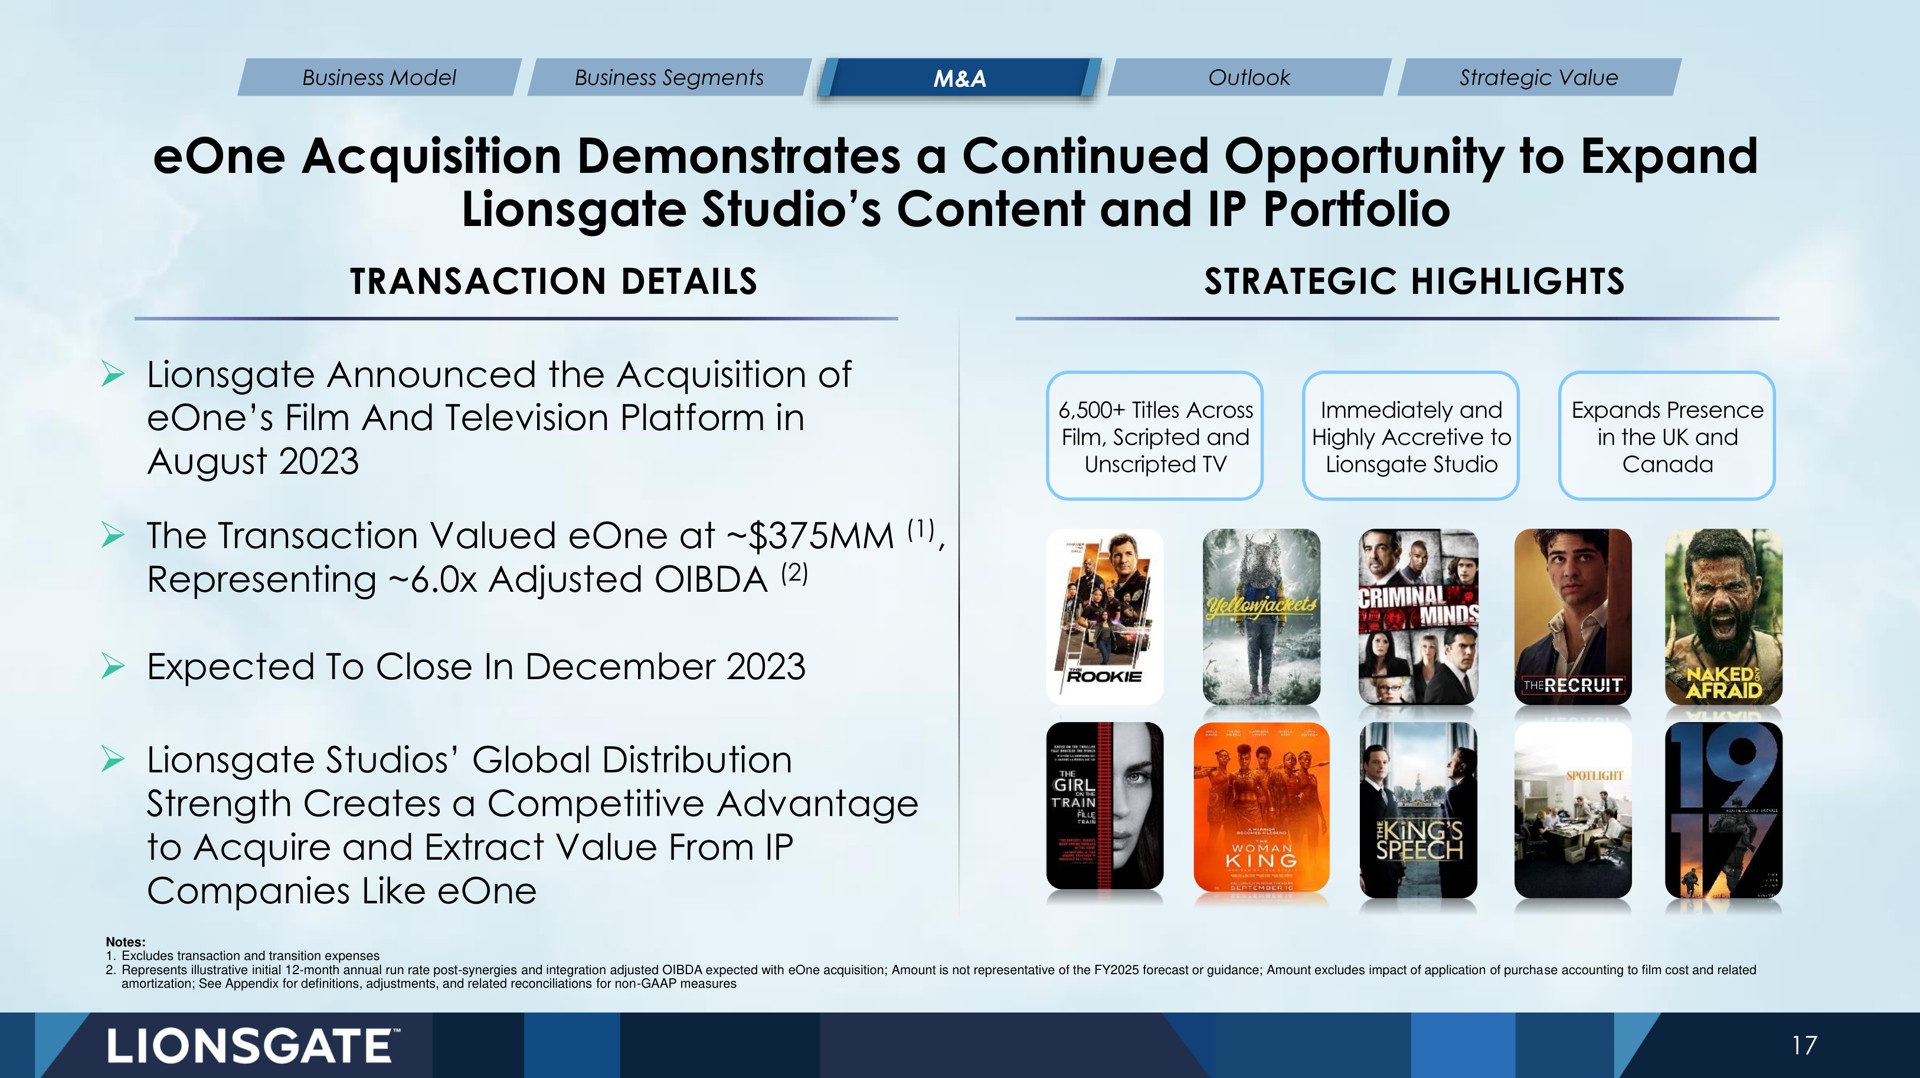 acquisition demonstrates a continued opportunity to expand studio content and portfolio mined film television platform in the transaction valued at | Lionsgate